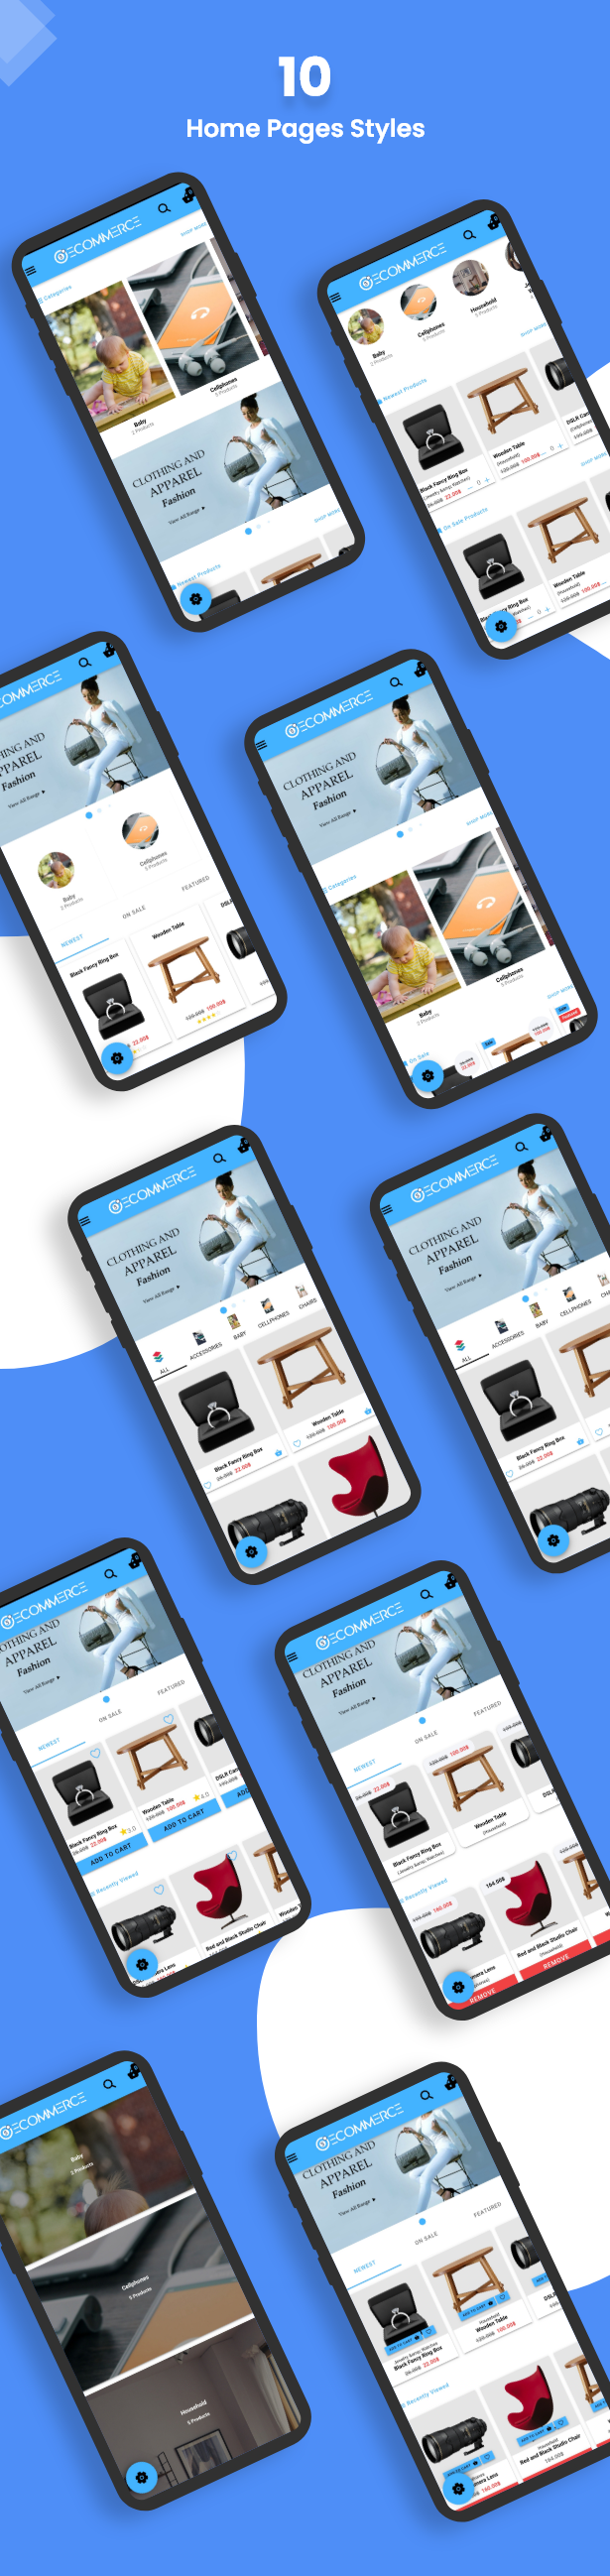 Ionic React Woocommerce - Universal Full Mobile App Solution for iOS & Android / Wordpress Plugins - 12